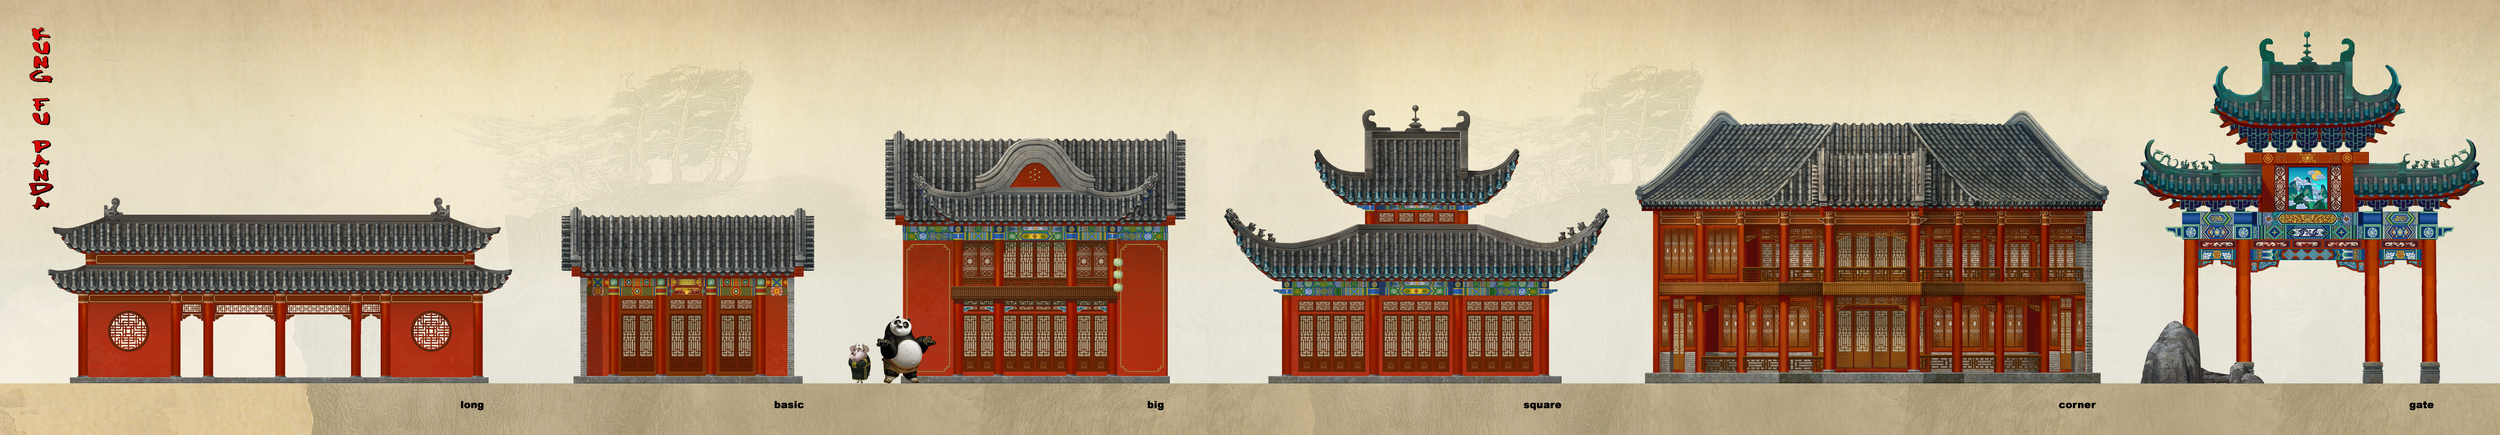  Kung Fu Panda, DWA Valley of Peace - Building design 